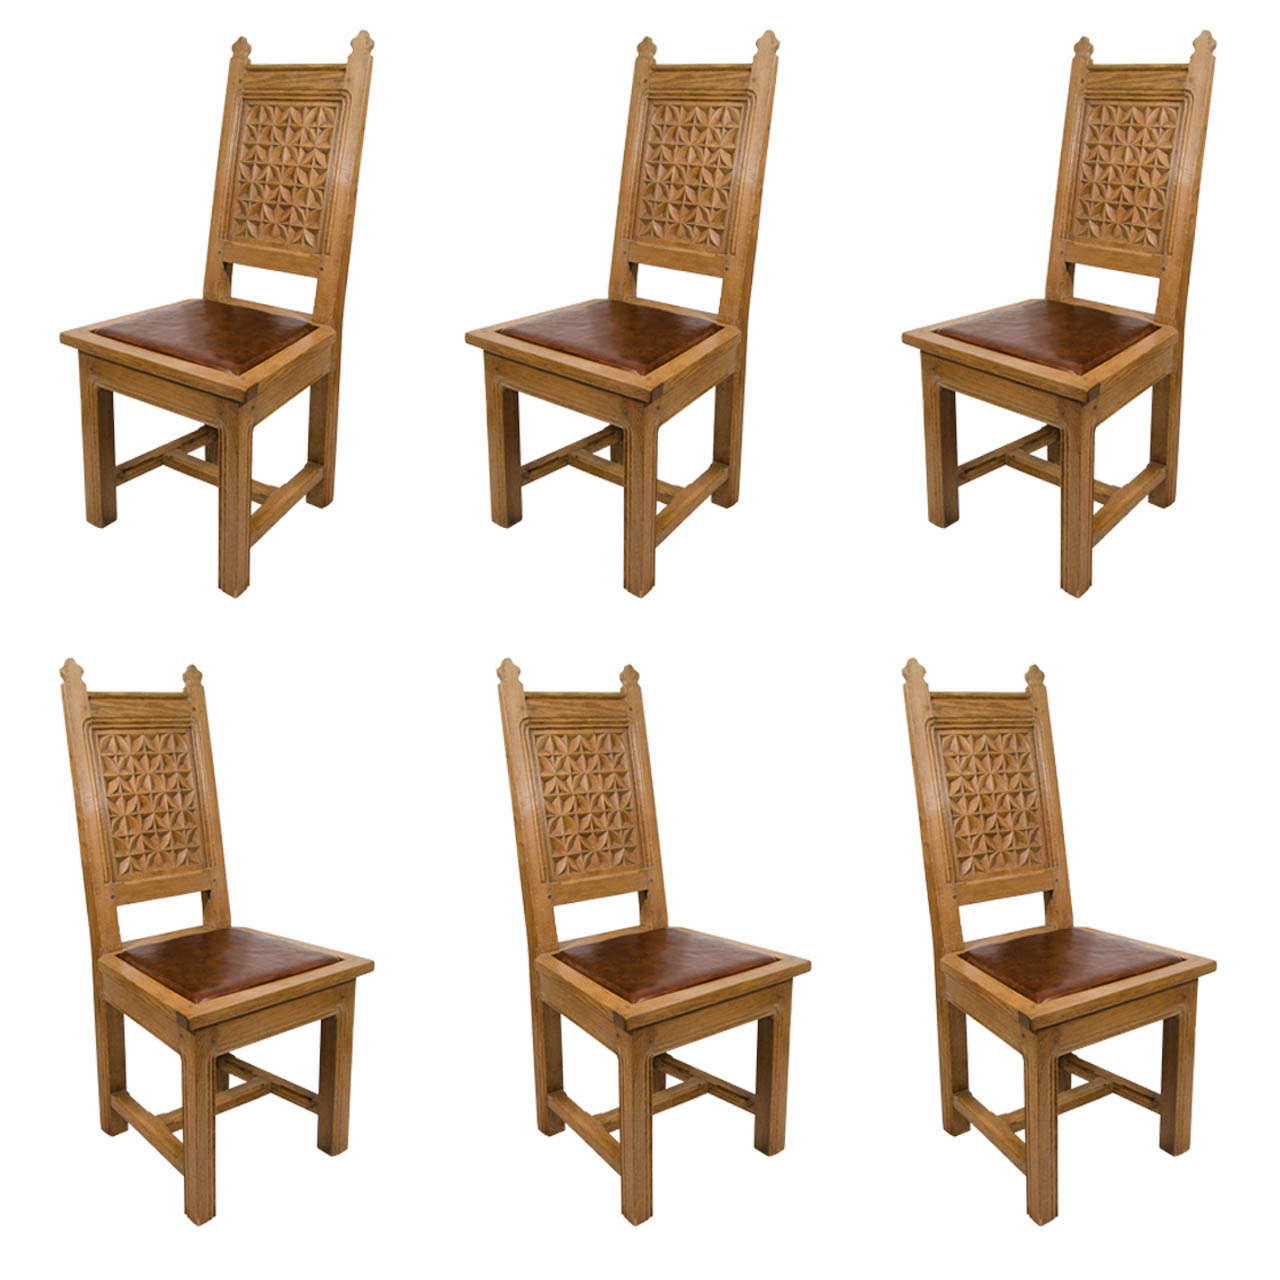 6 Oak & Leather Chairs